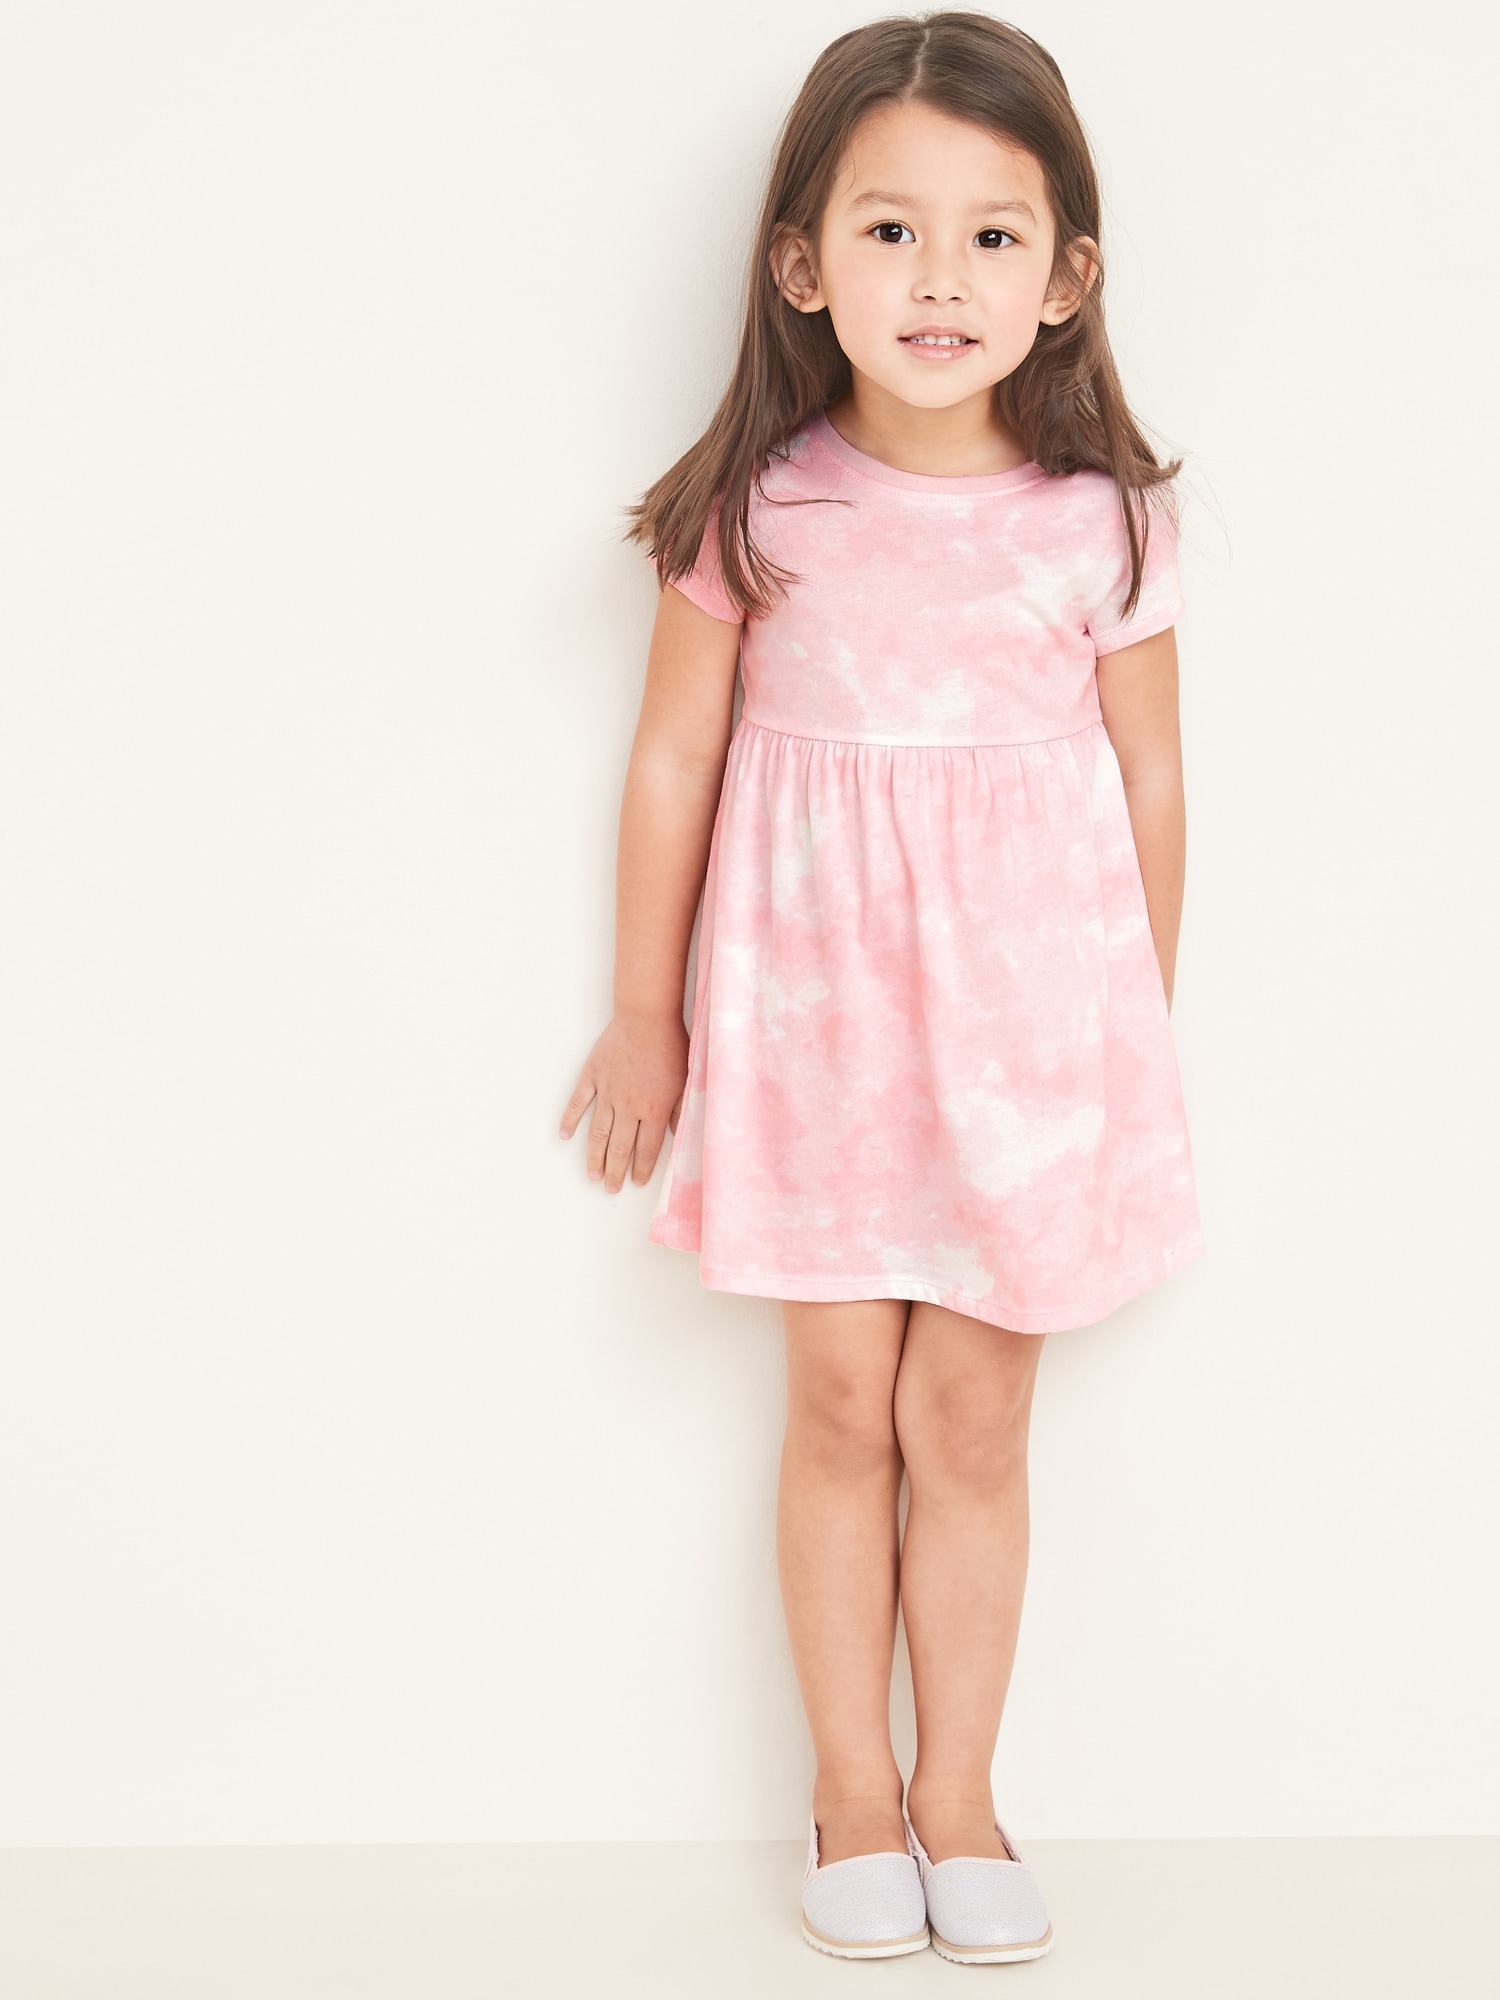 Printed Fit & Flare Dress for Toddler Girls